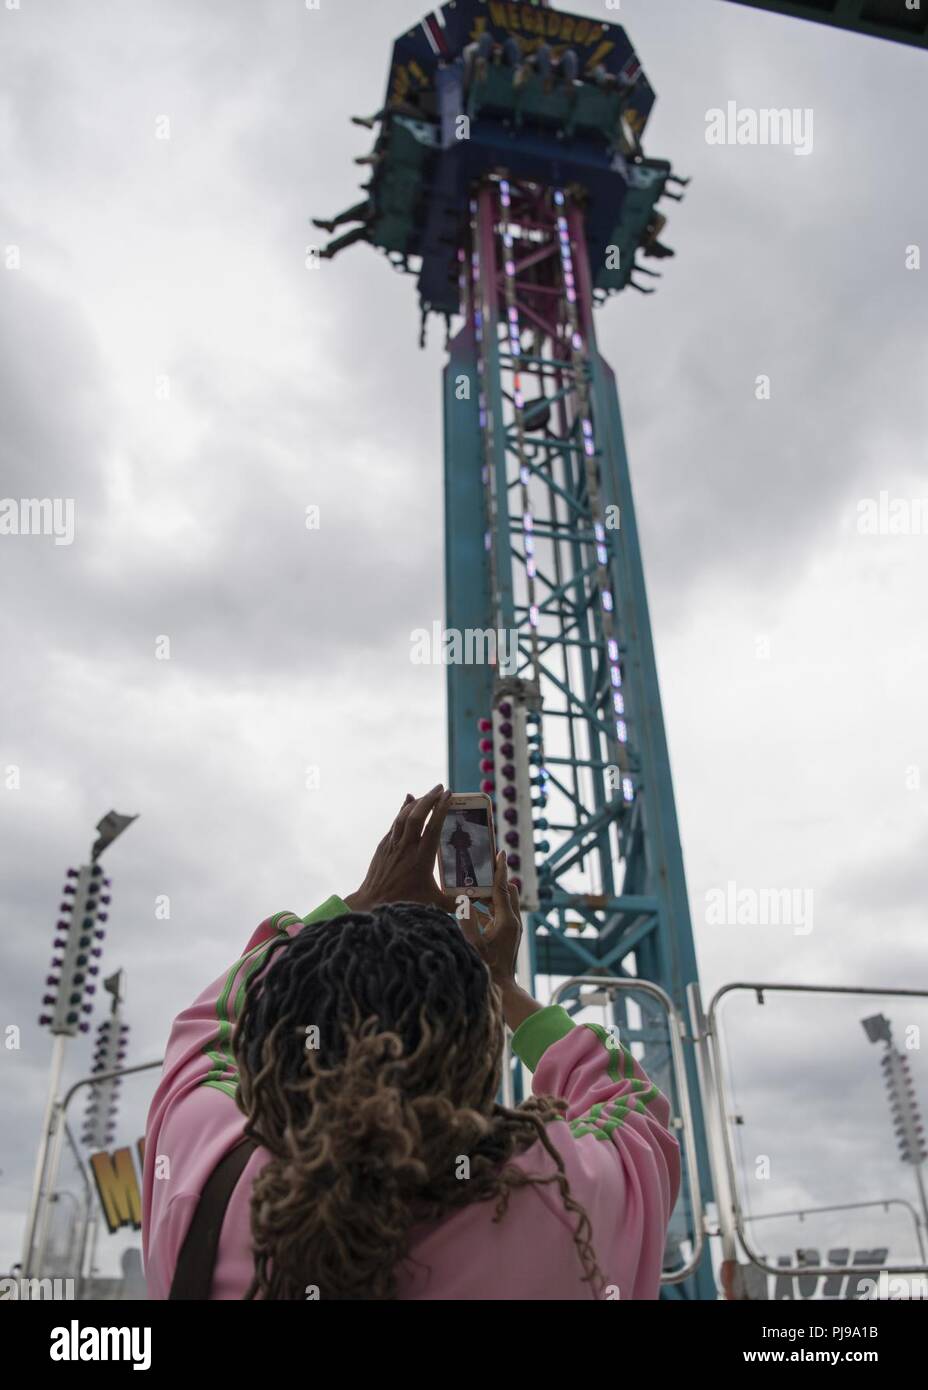 A spectator takes a picture of participants riding the “Mega Drop” during the 3rd annual Summer Fest hosted by the 673d Force Support Squadron at Joint Base Elmendorf-Richardson, Alaska, July 8, 2018. The event was open to anyone with base access and offered free activities such as carnival rides, a petting zoo, face painting, a bungee trampoline, and carnival games. Stock Photo